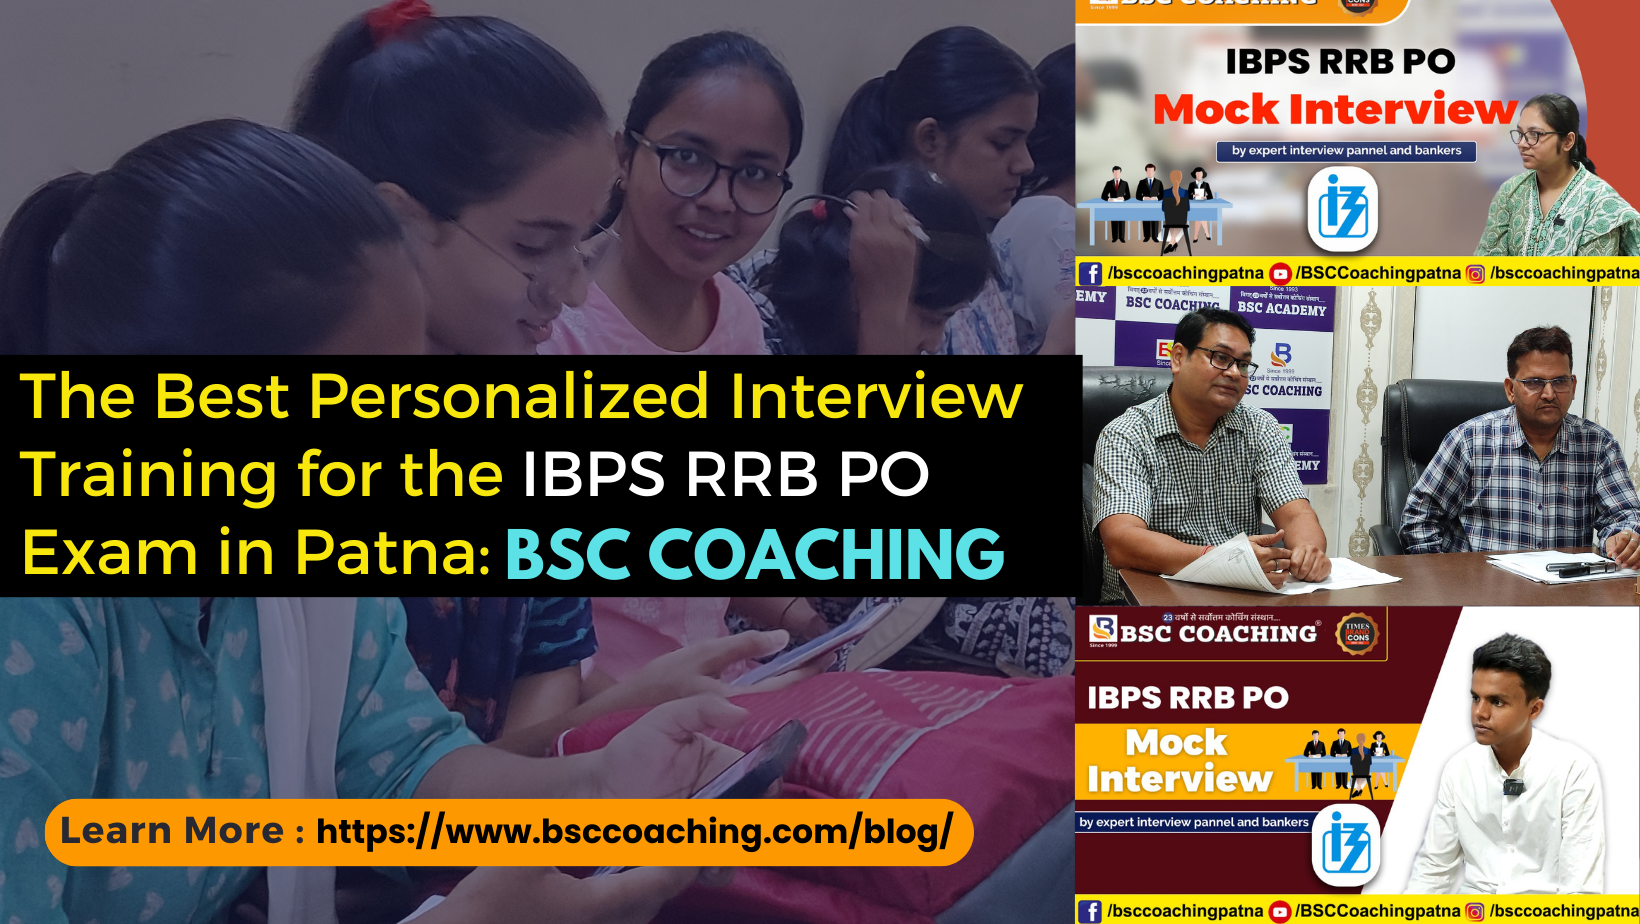 The Best Personalized Interview Training for the IBPS RRB PO Exam in Patna: BSC Coaching